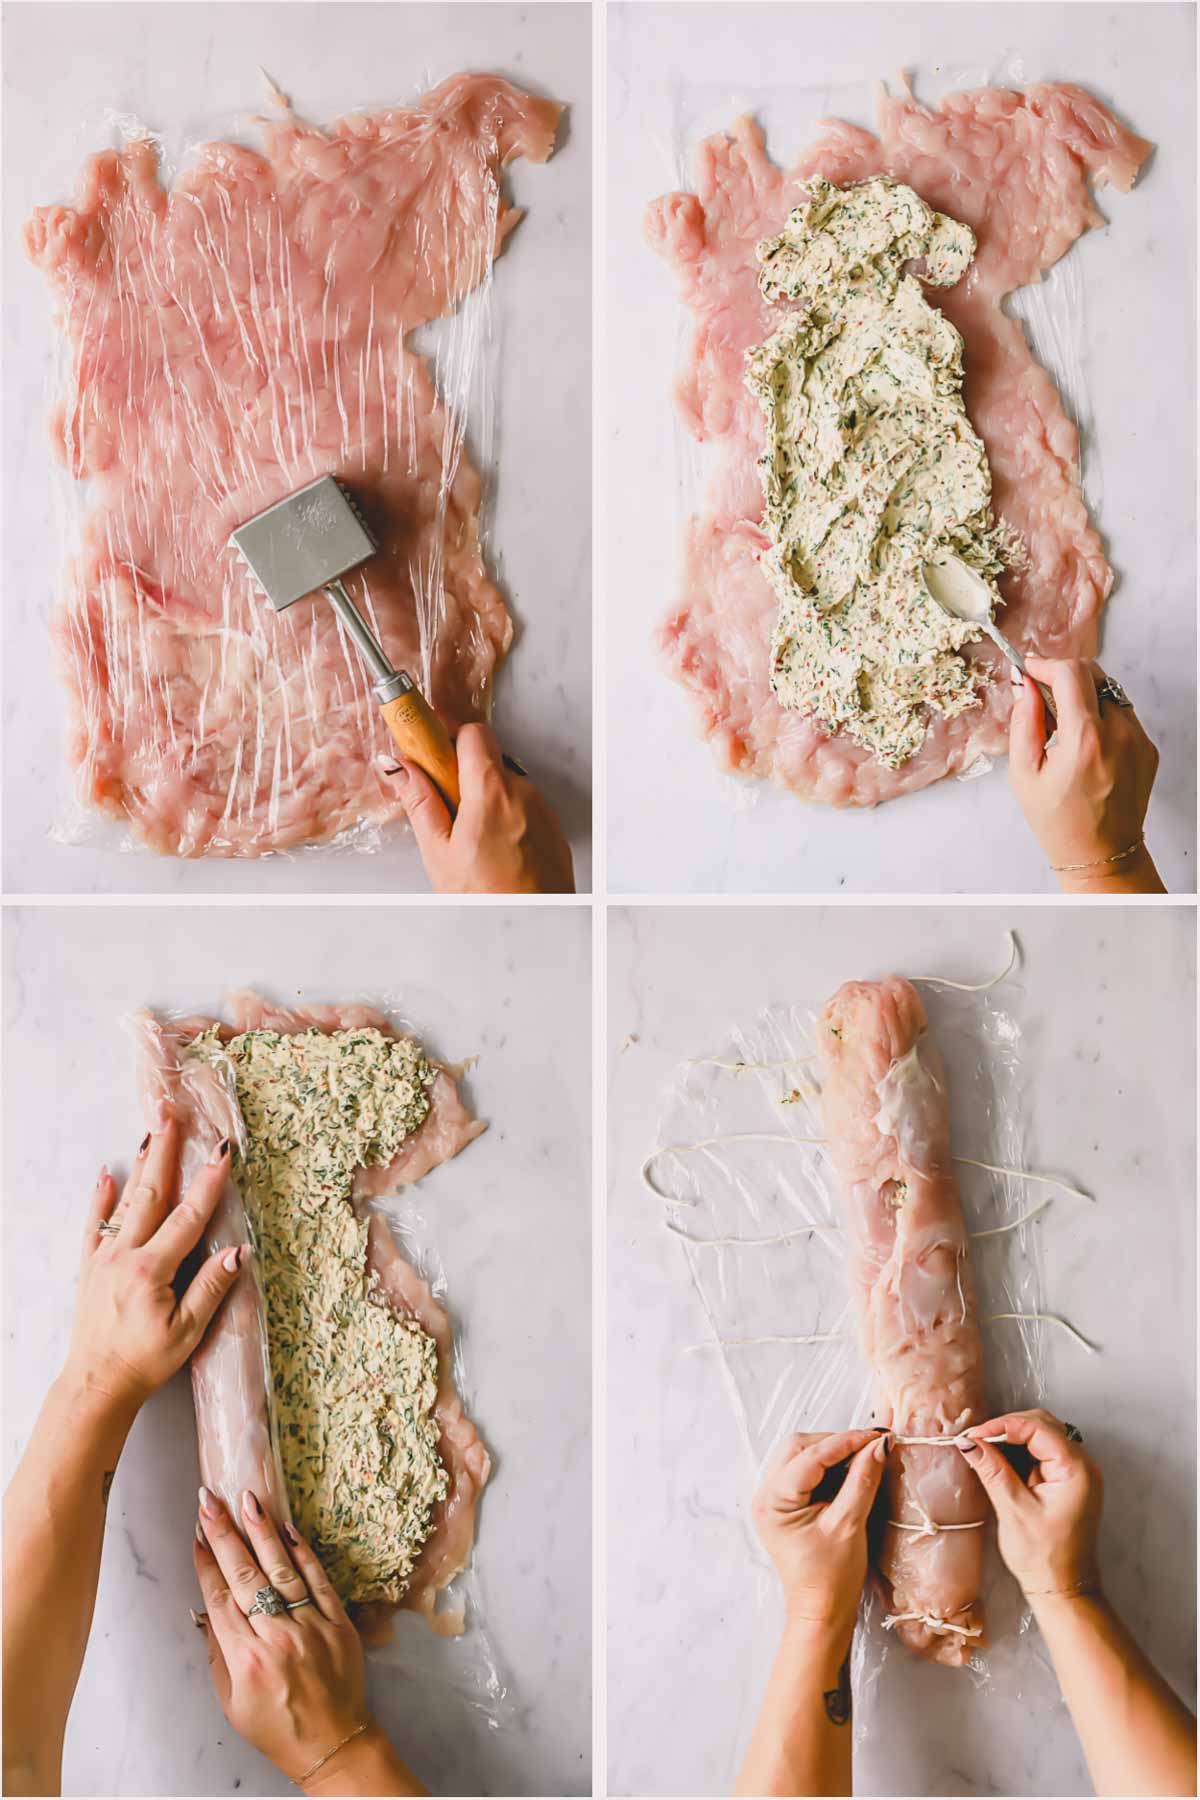 Four images showing the process of stuffing and rolling turkey.